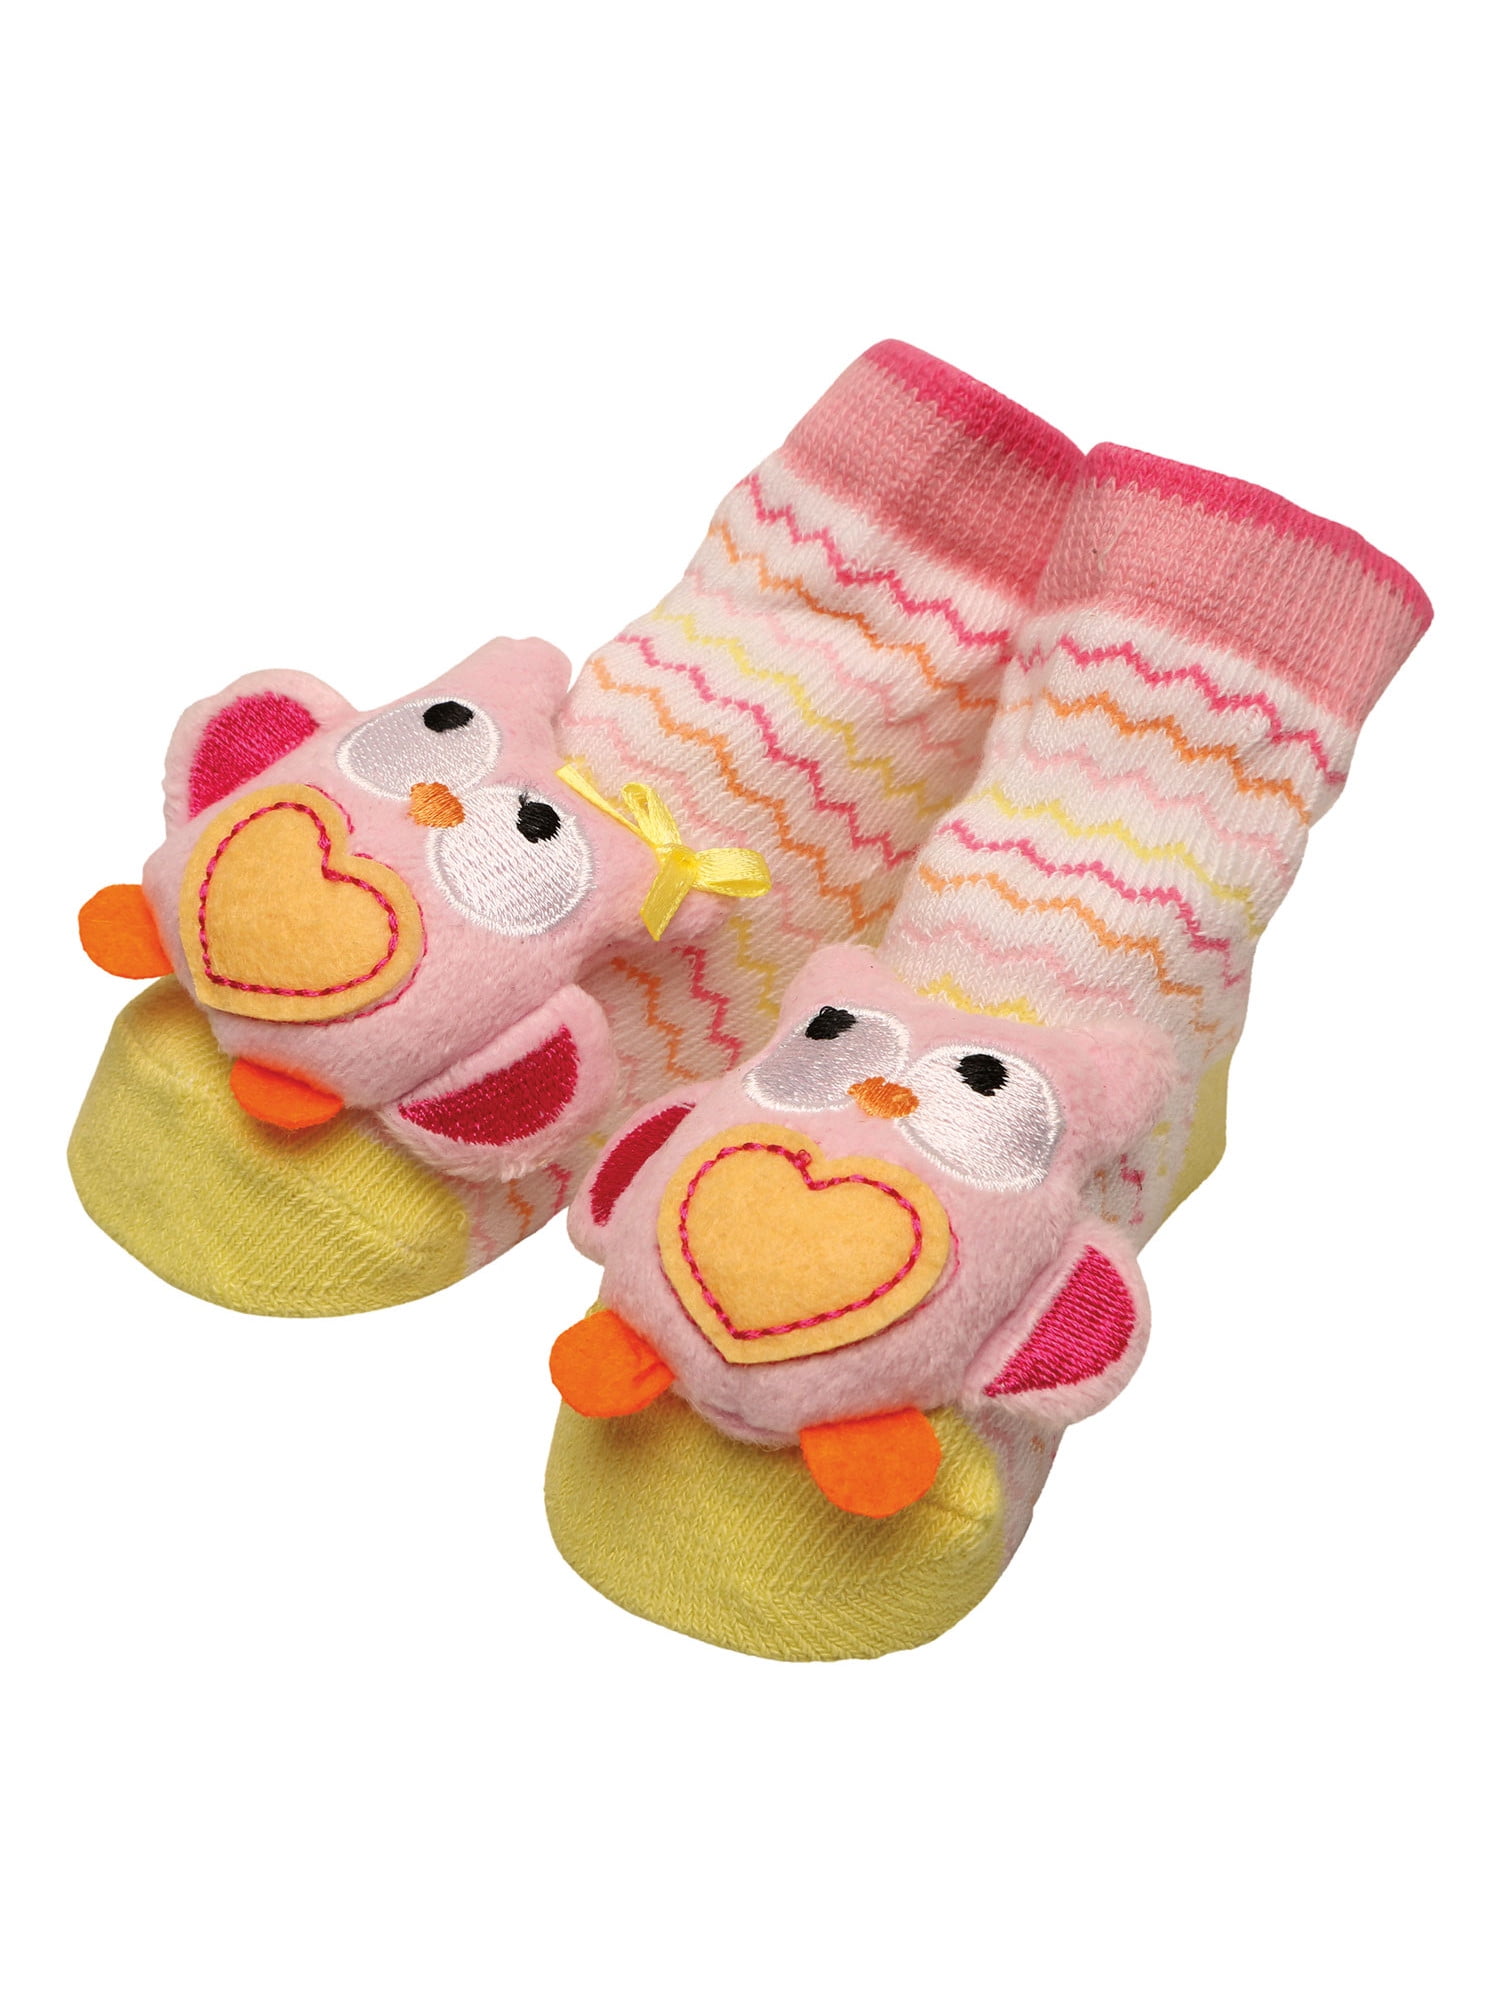 baby shoes with socks attached